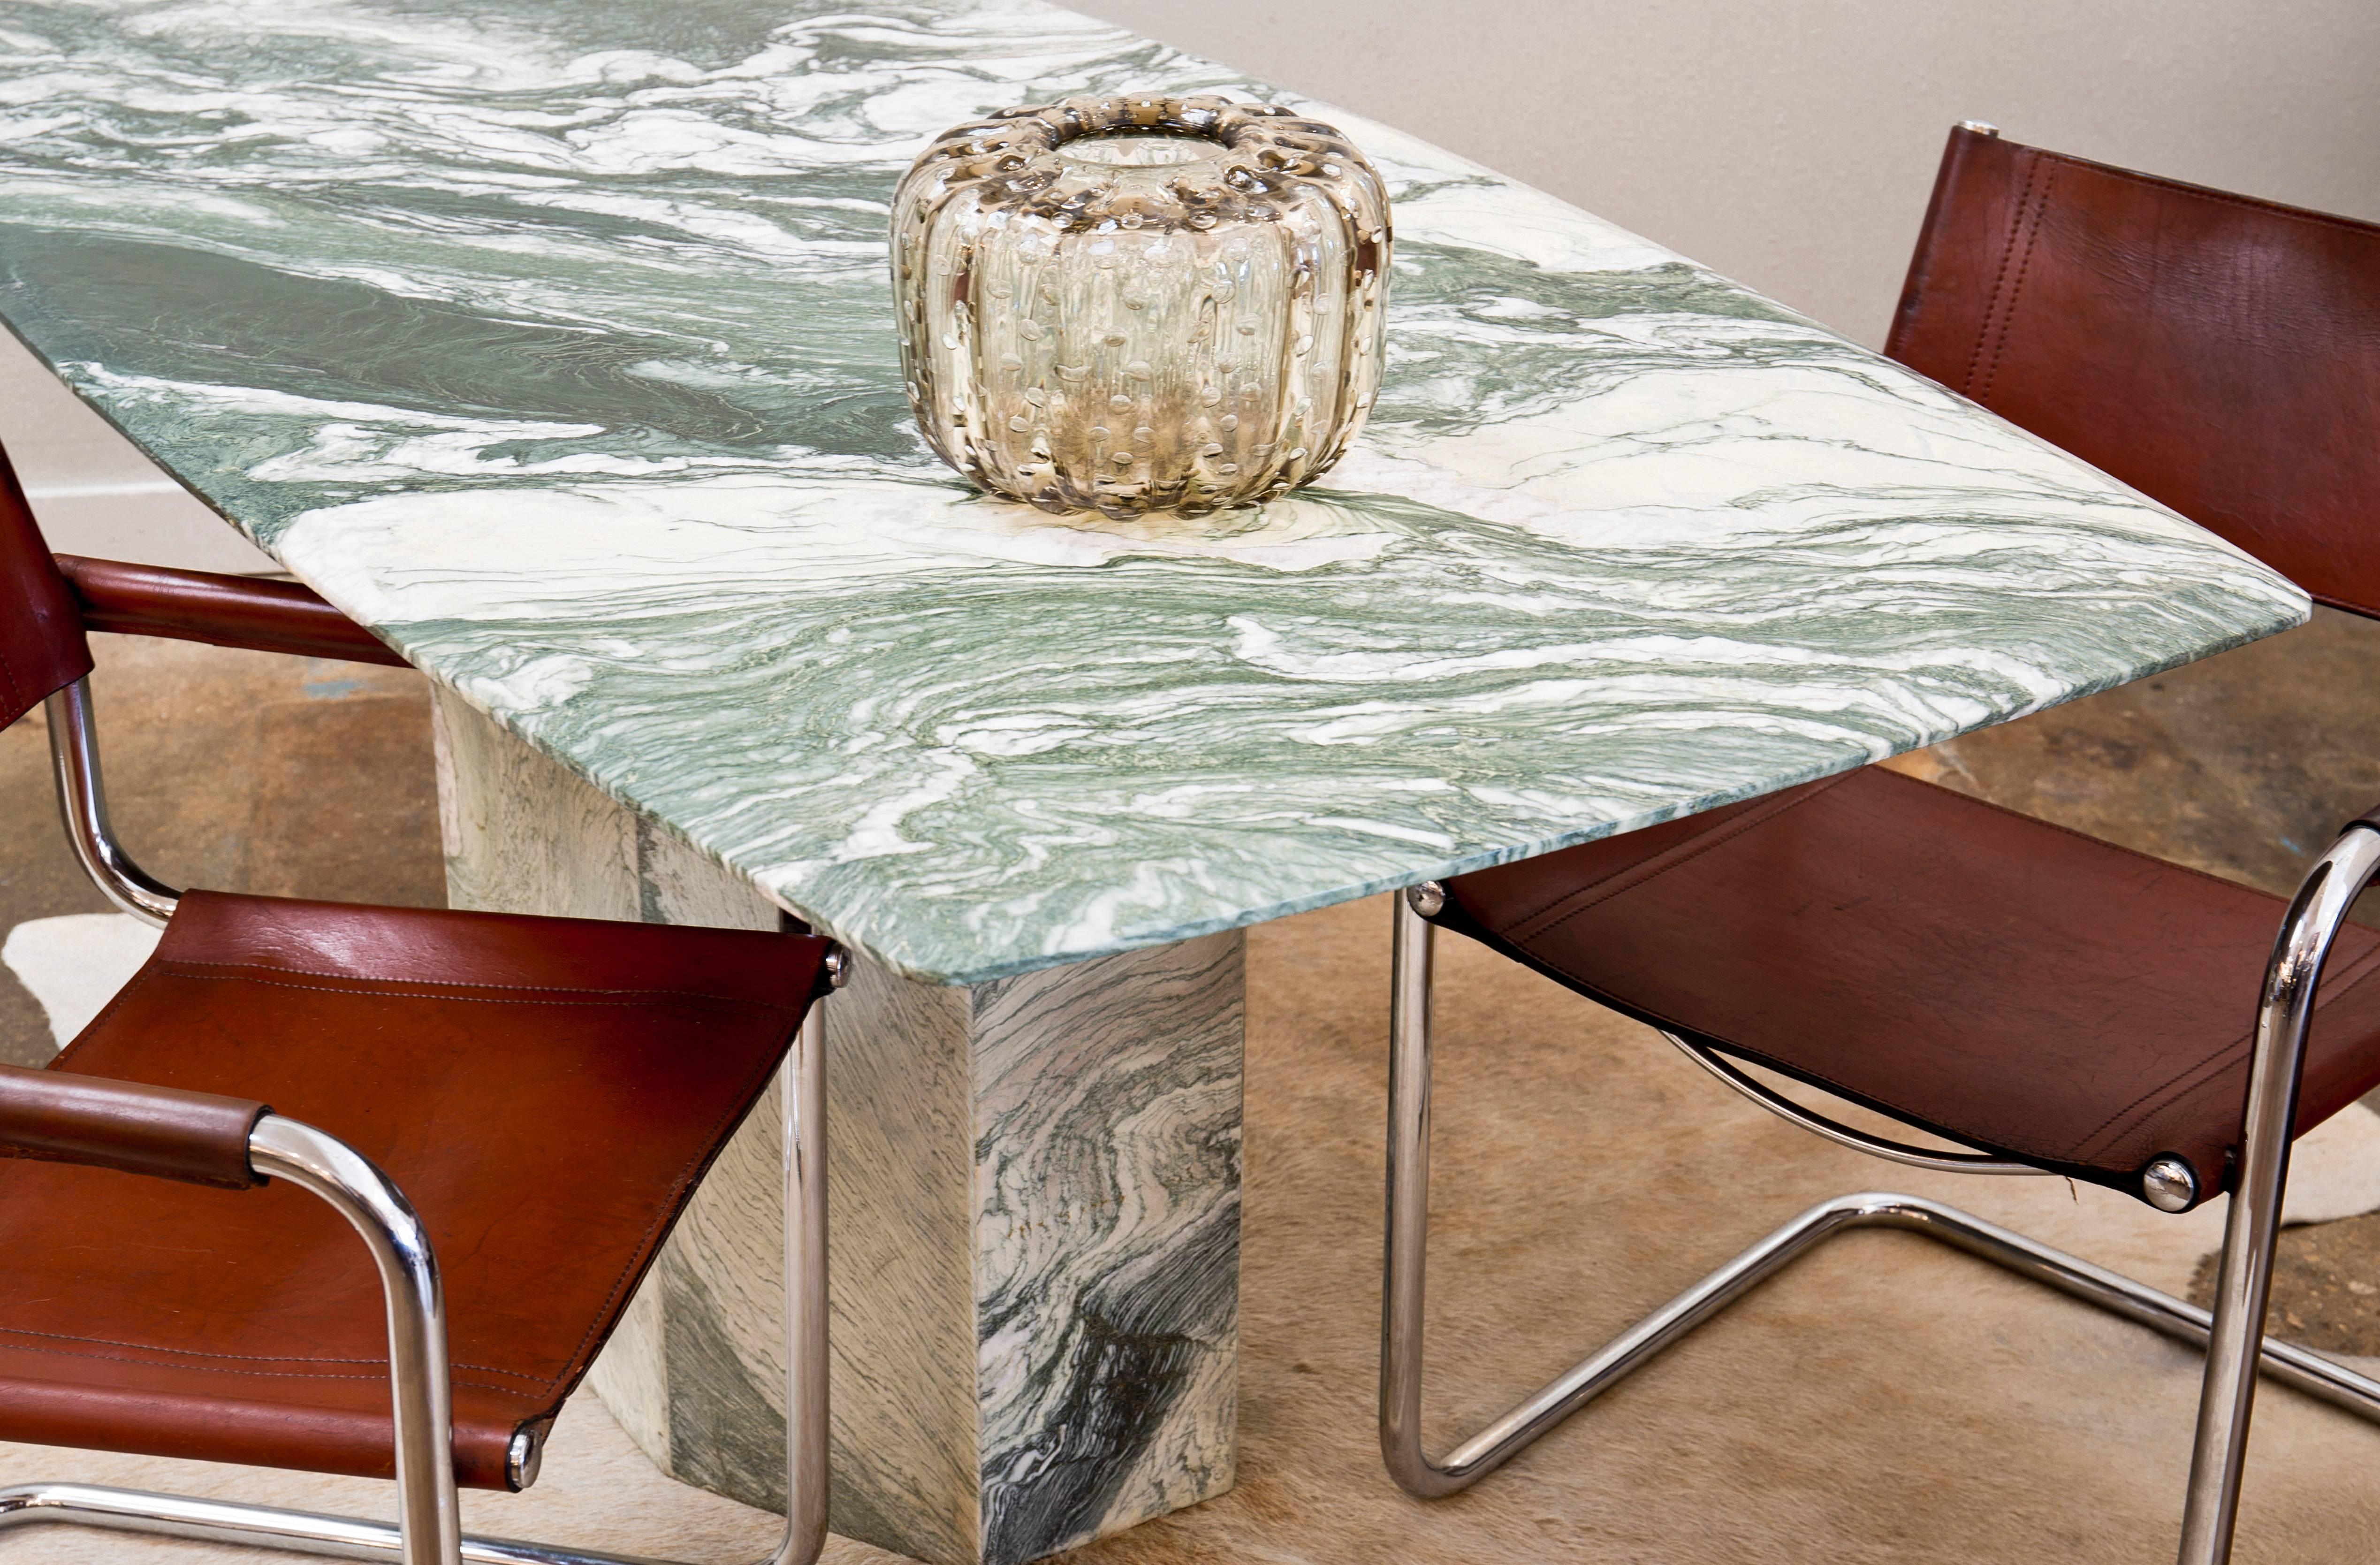 Stunning Verde Luana marble dining room table. Verde luana is a historic marble extracted in quarries located in Northern Italy. We couldn't resist the unique green color, bright and intense and the wavy veins. The top slab is just tremendous.